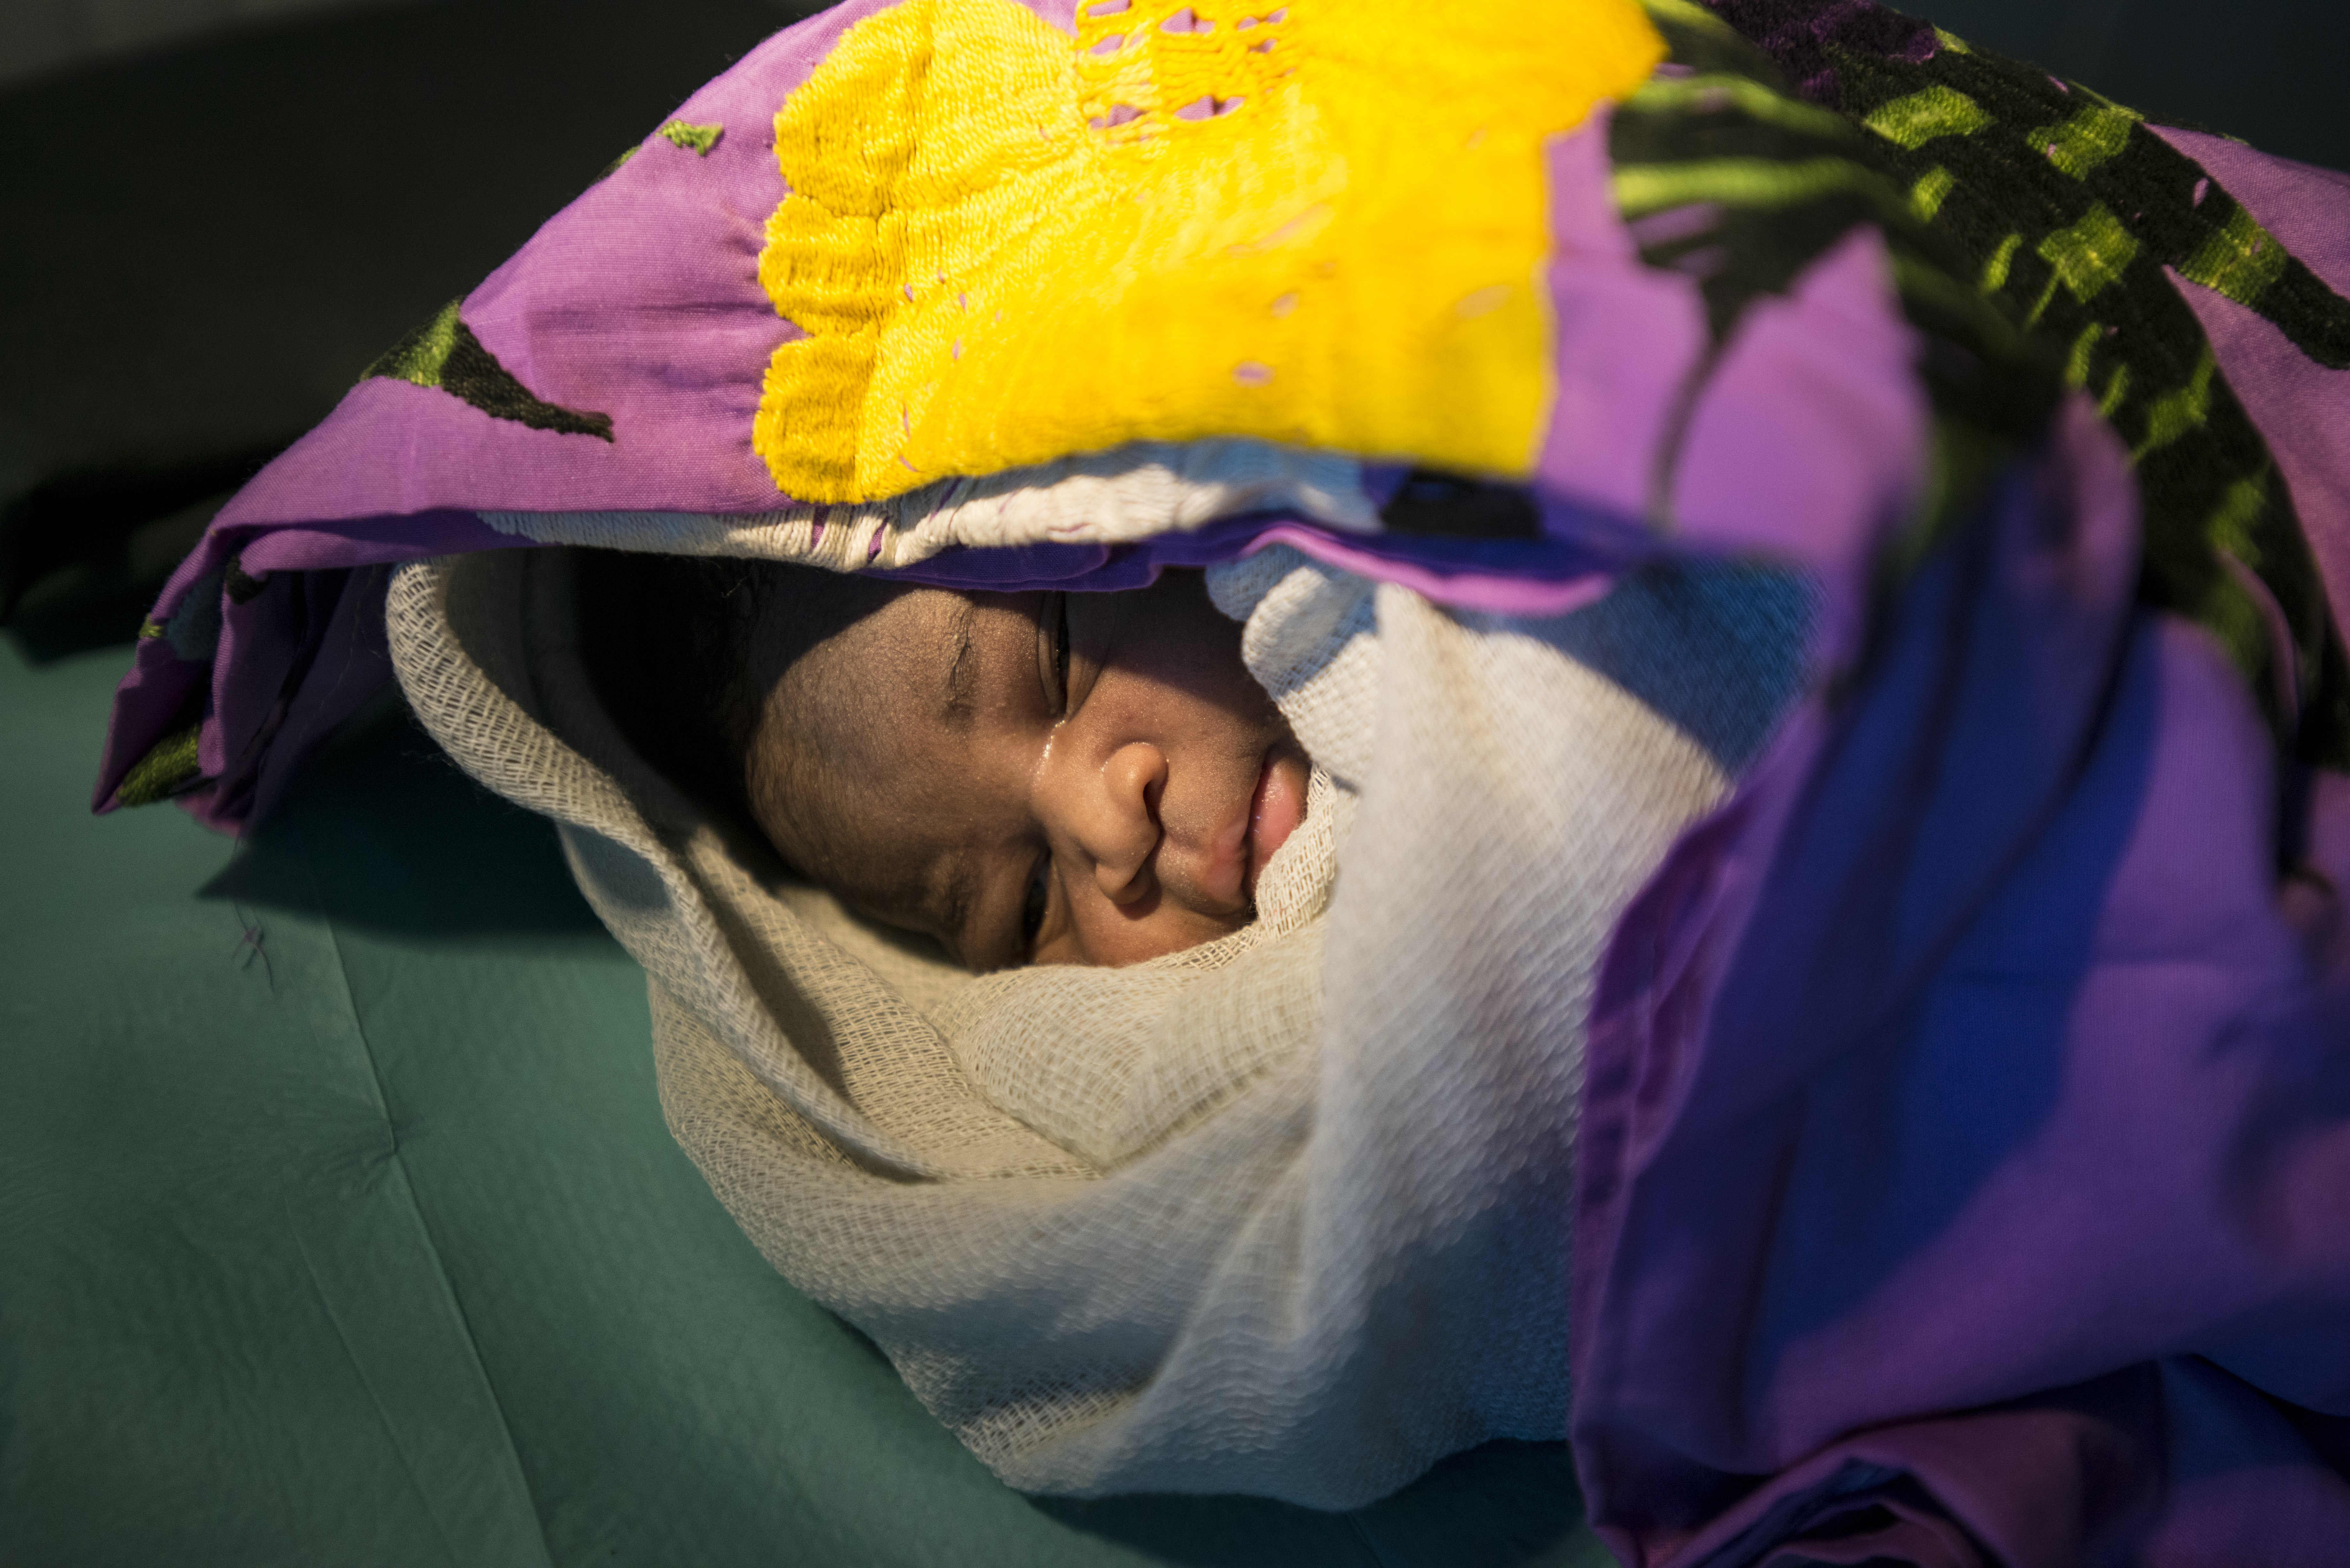 Another image of Julie Akol's newborn son delivered in the UNICEF supported IMC clinic in Malakal, South Sudan.